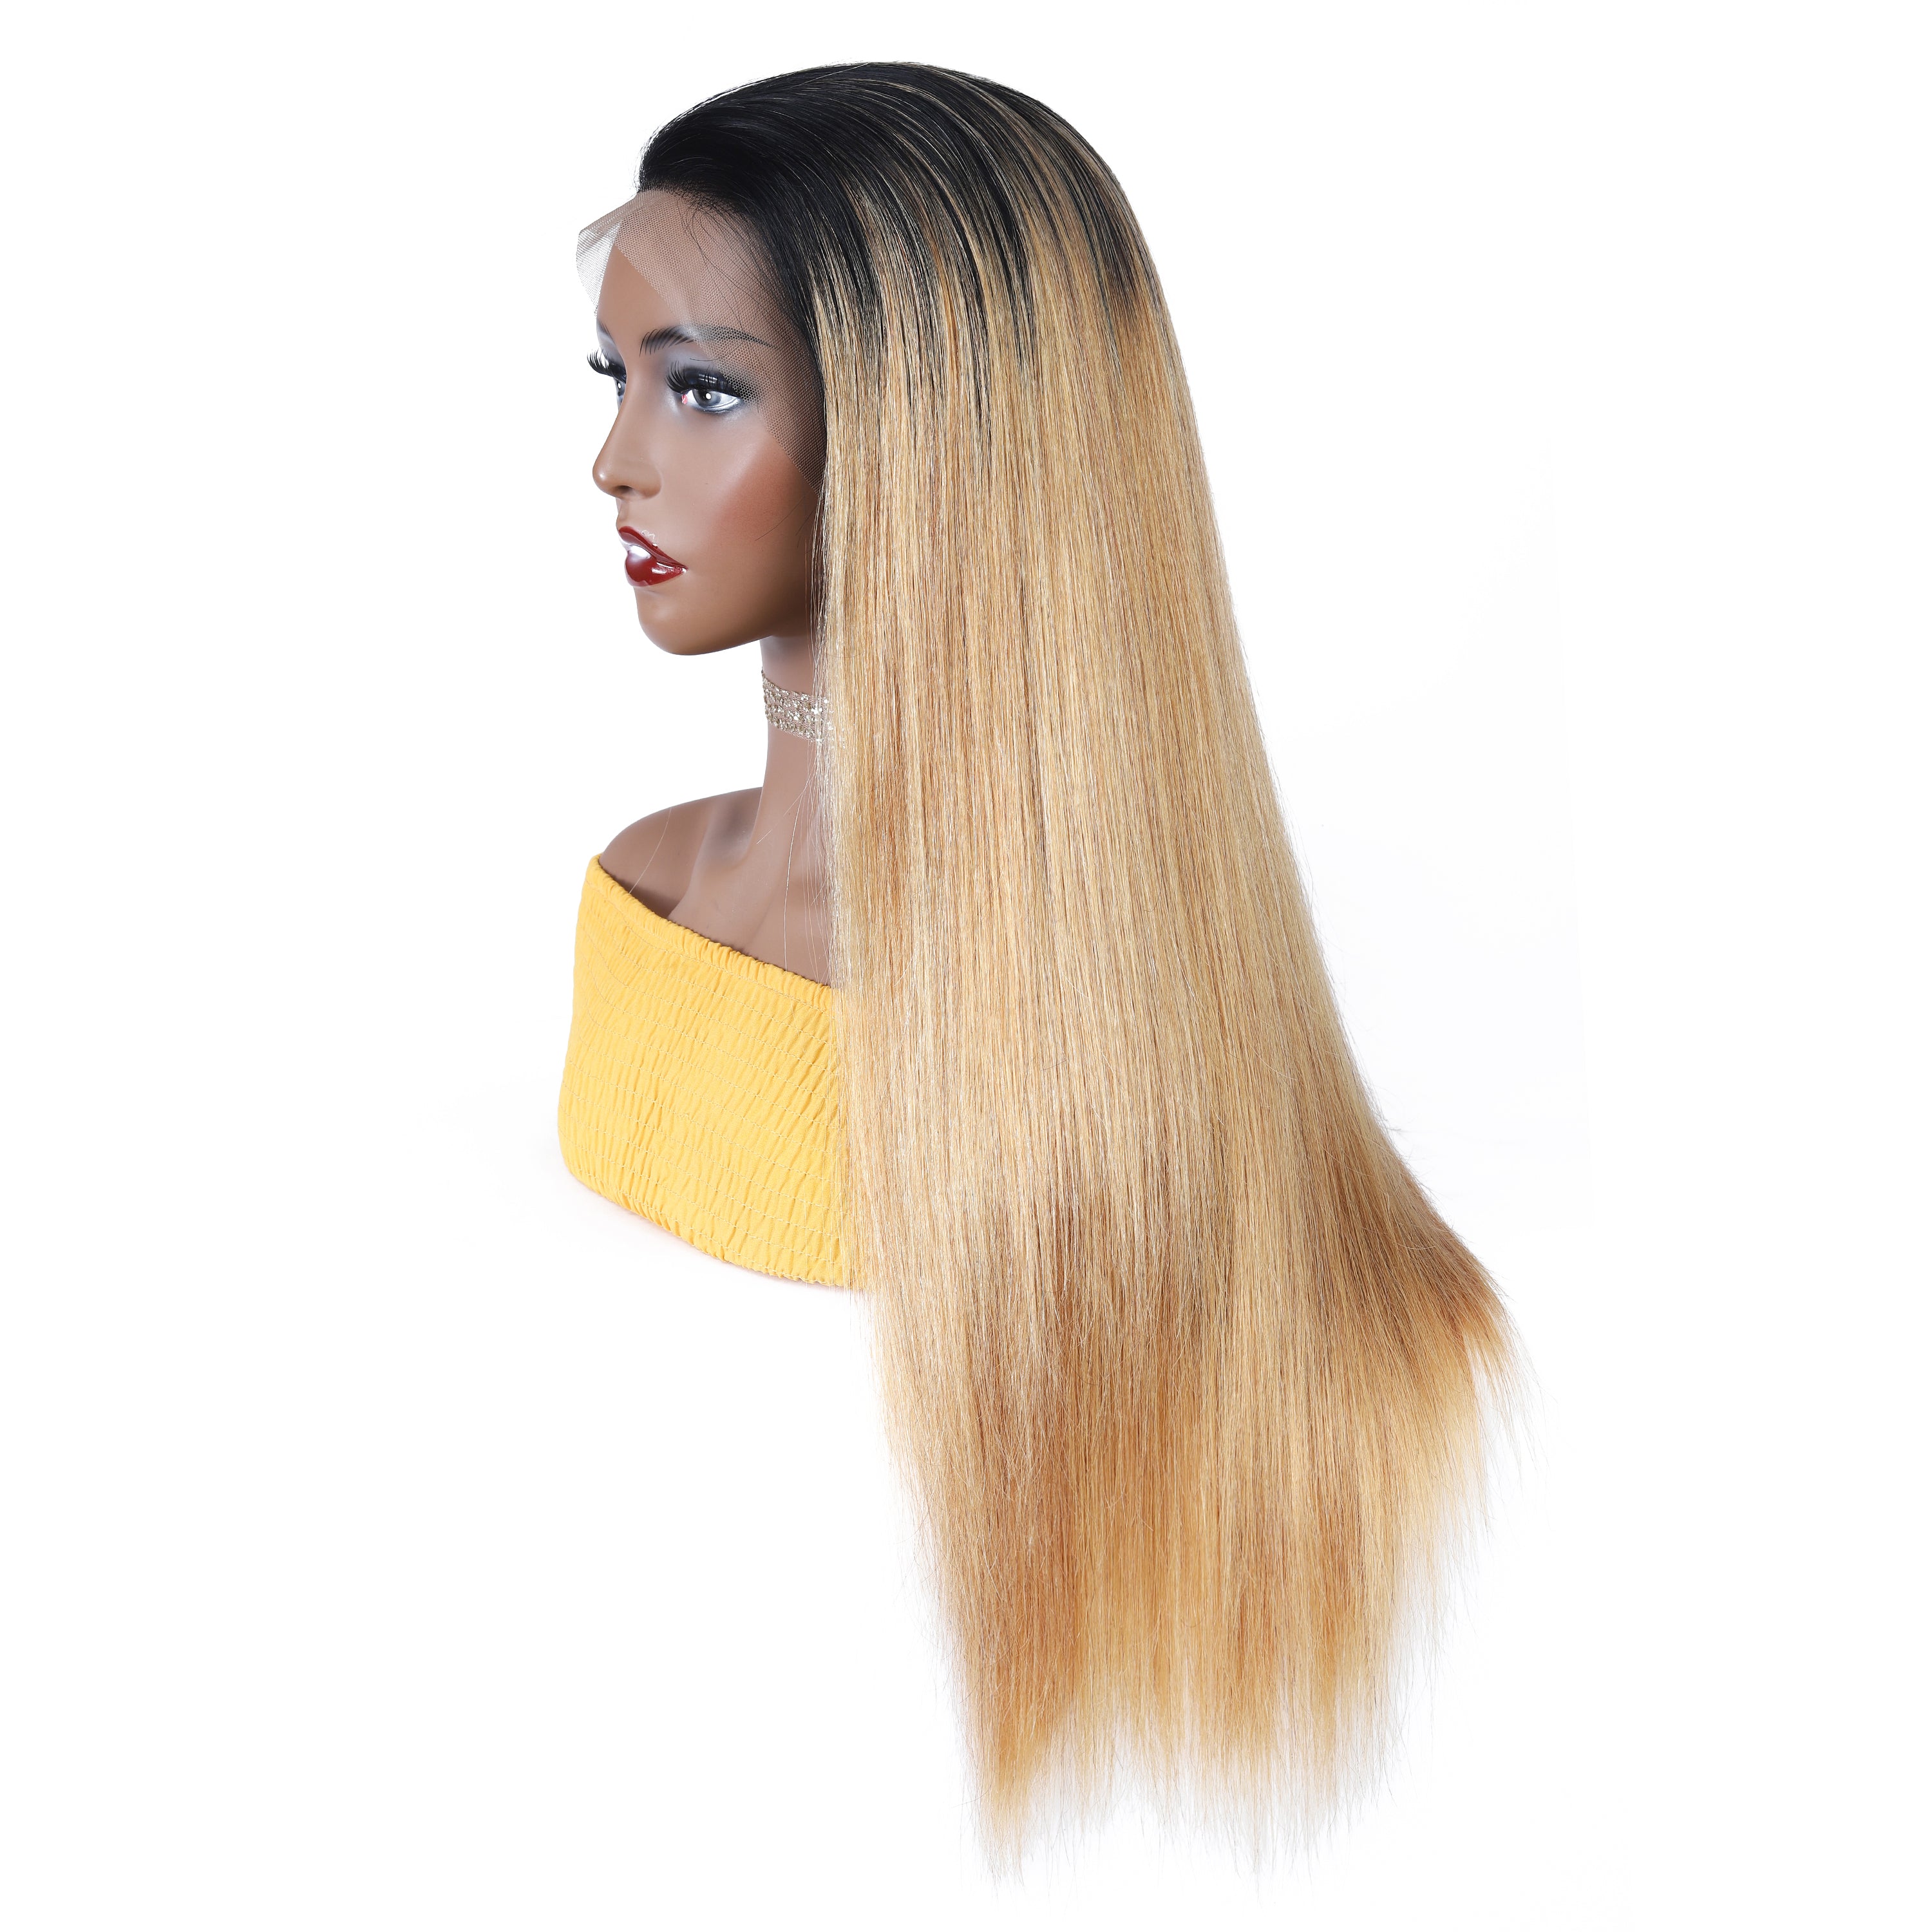 Ronashow Dark Roots 1B/27 Ombre Color Straight 13x4 Lace Frontal Human Hair Wig